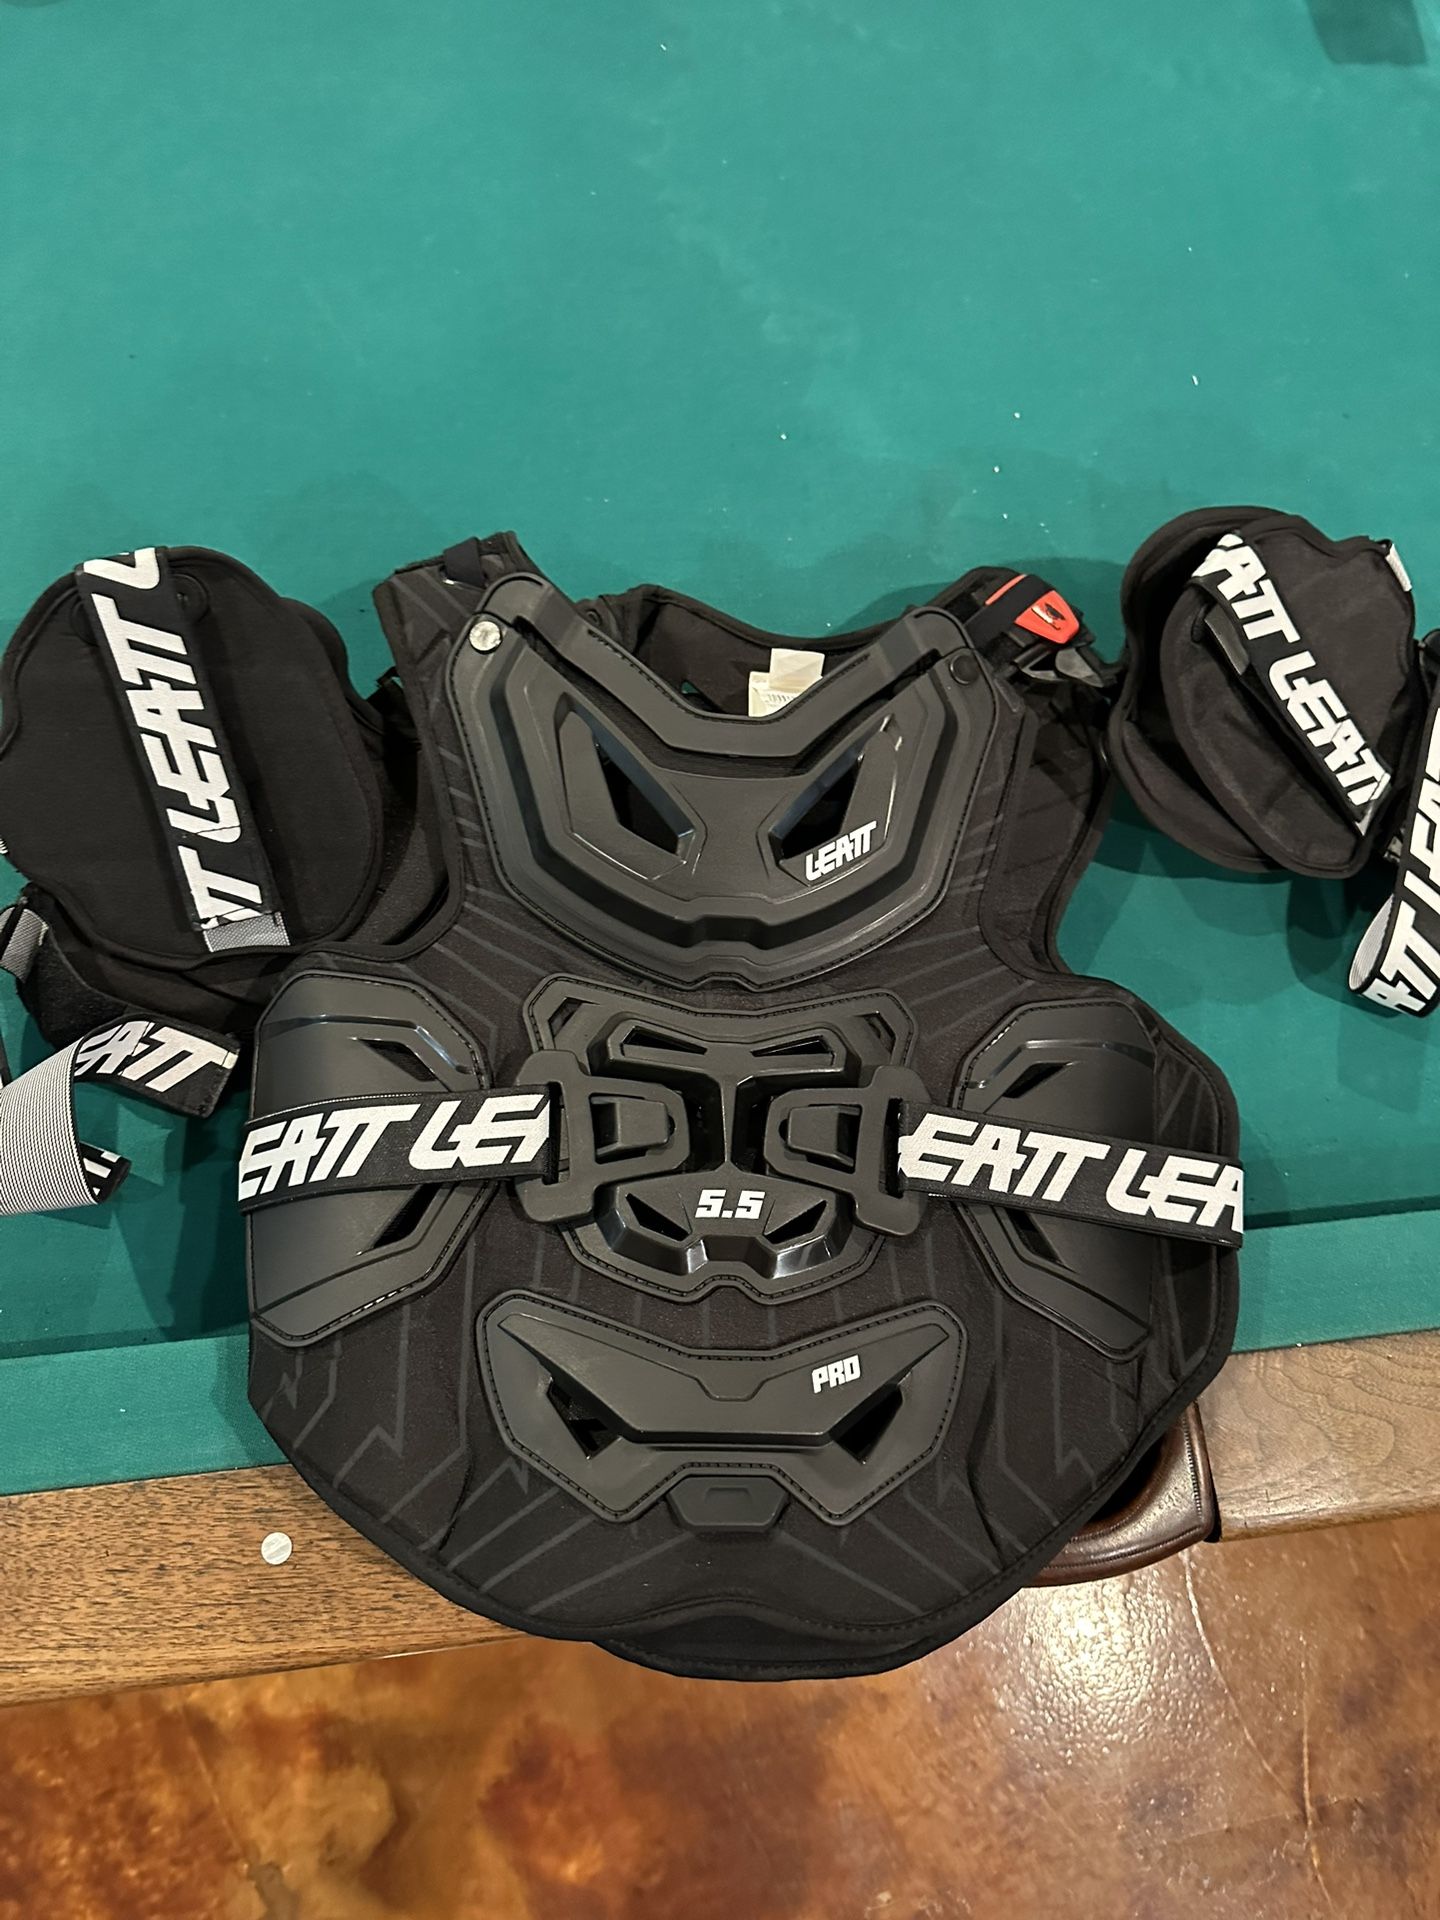 Leatt 5.5 Pro Chest Protector Riding Padded Jersey 